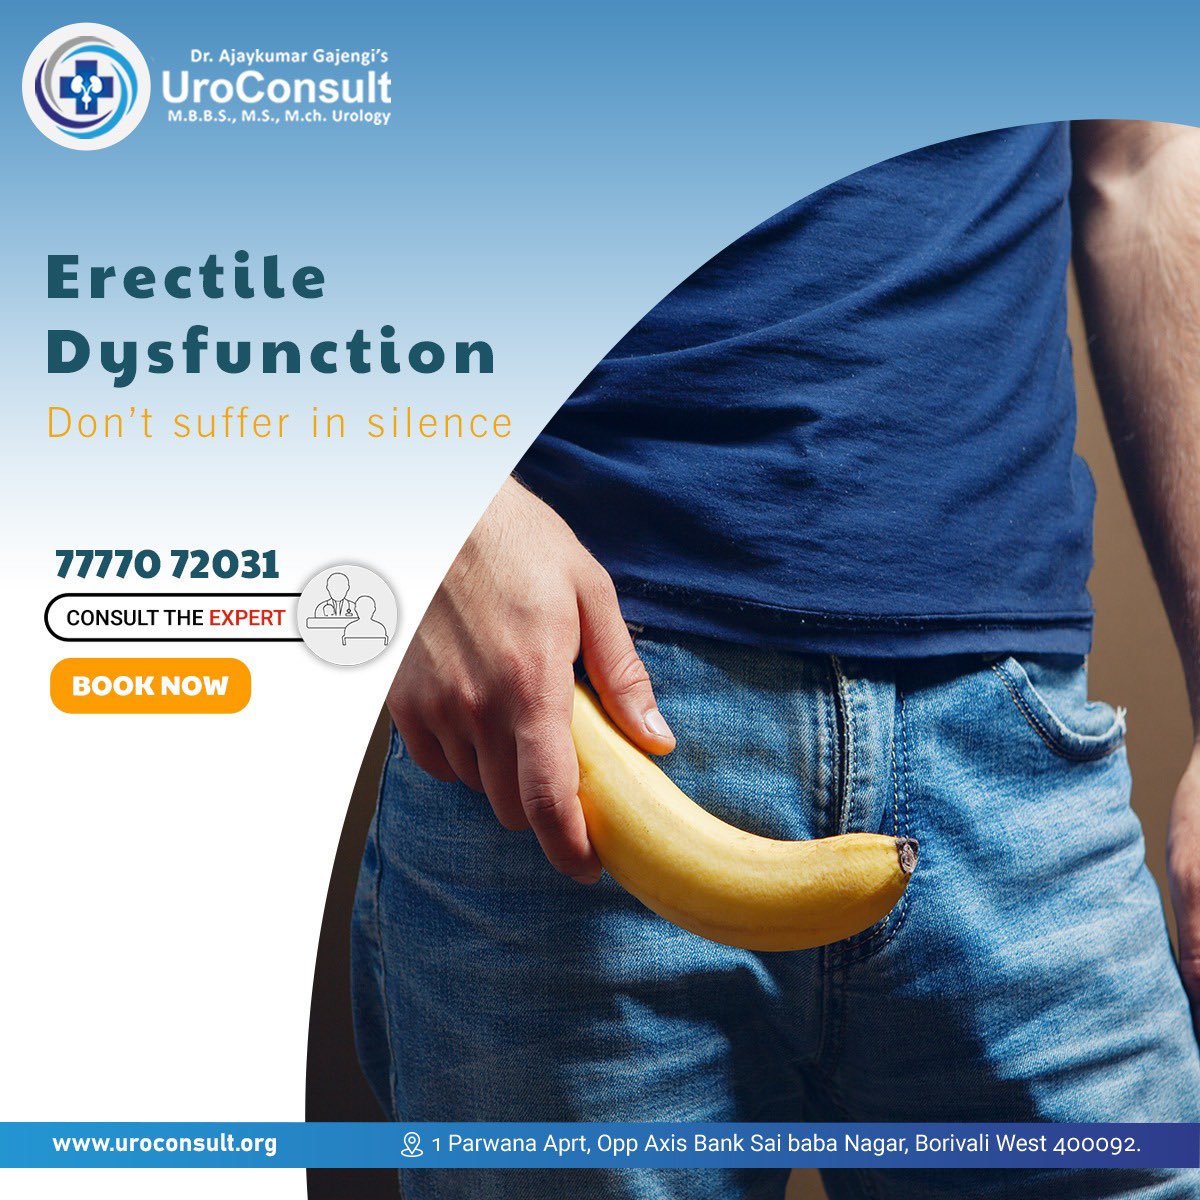 Do Not Suffer In Silence.

Consult the best andrologist in mumbai for Erectile Dysfunction.

uroconsult.org

#erectiledysfunction #erectiledysfunctiontreatment #erectiledysfunctionawareness #stressmanagement #andrologists #best #penisenlargementsurgery